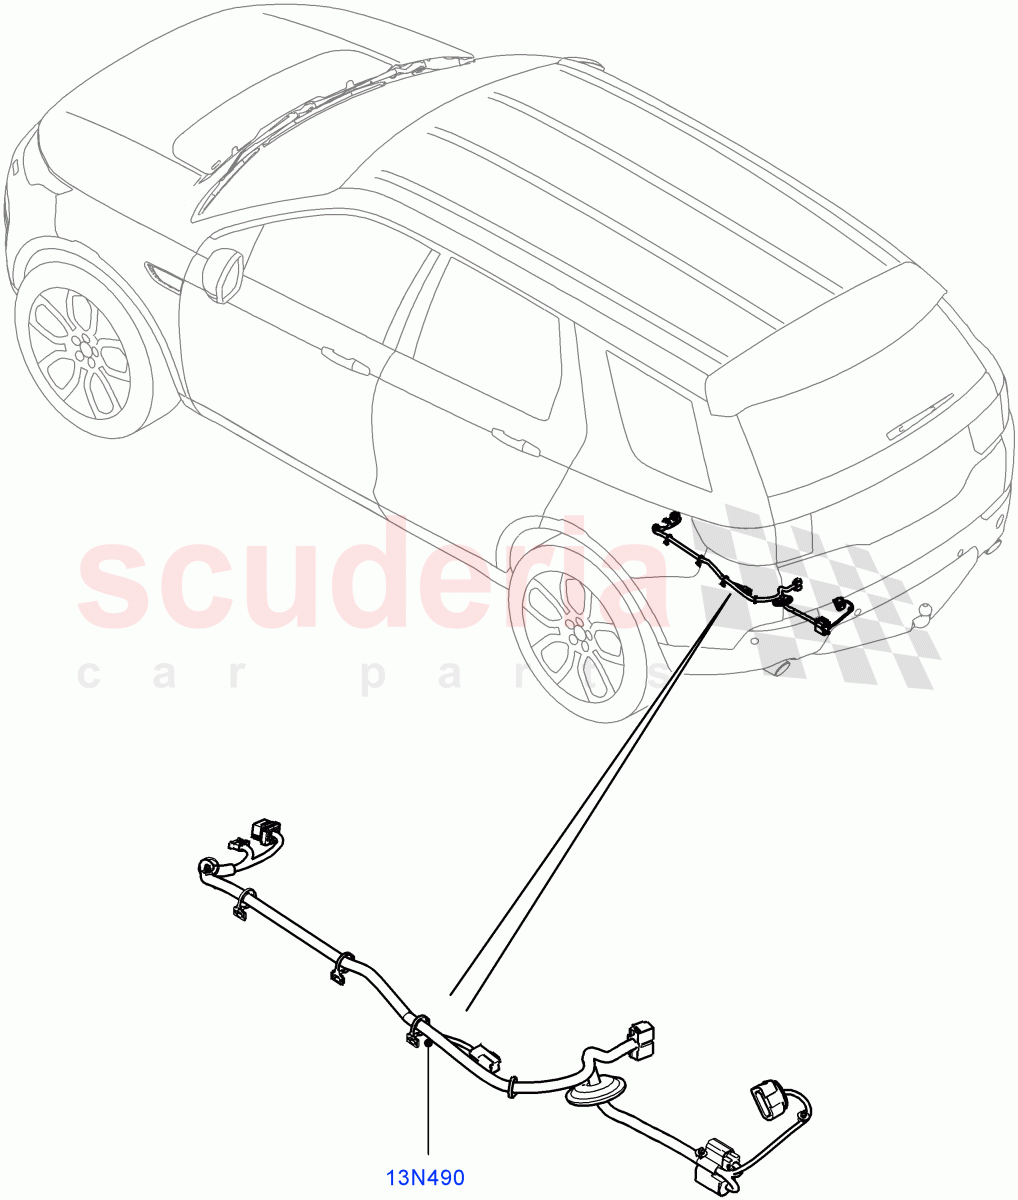 Electrical Wiring - Body And Rear(Towing)(Halewood (UK),T/Tow Hitch Prep - ROW,Tow Hitch Elec Deployable Swan Neck,X-Bar Detachable Tow Ball - 13 Pin,With X-Bar Trailer Prep - NAS) of Land Rover Land Rover Discovery Sport (2015+) [2.0 Turbo Petrol AJ200P]